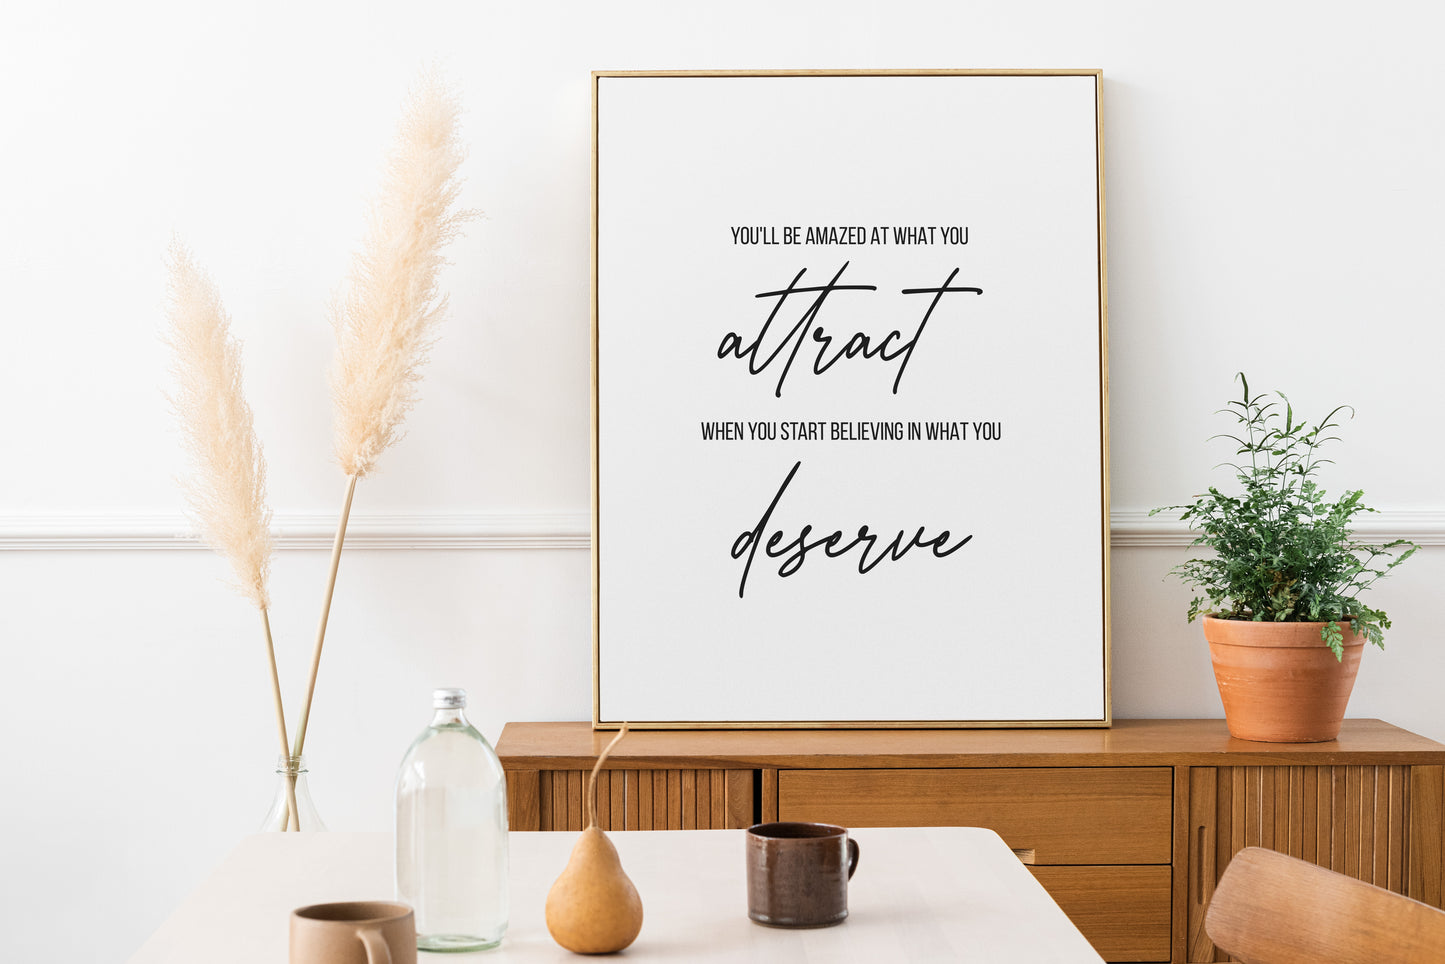 Law of Attraction Quotes, Motivation Poster, Quote Poster, Spiritual Poster